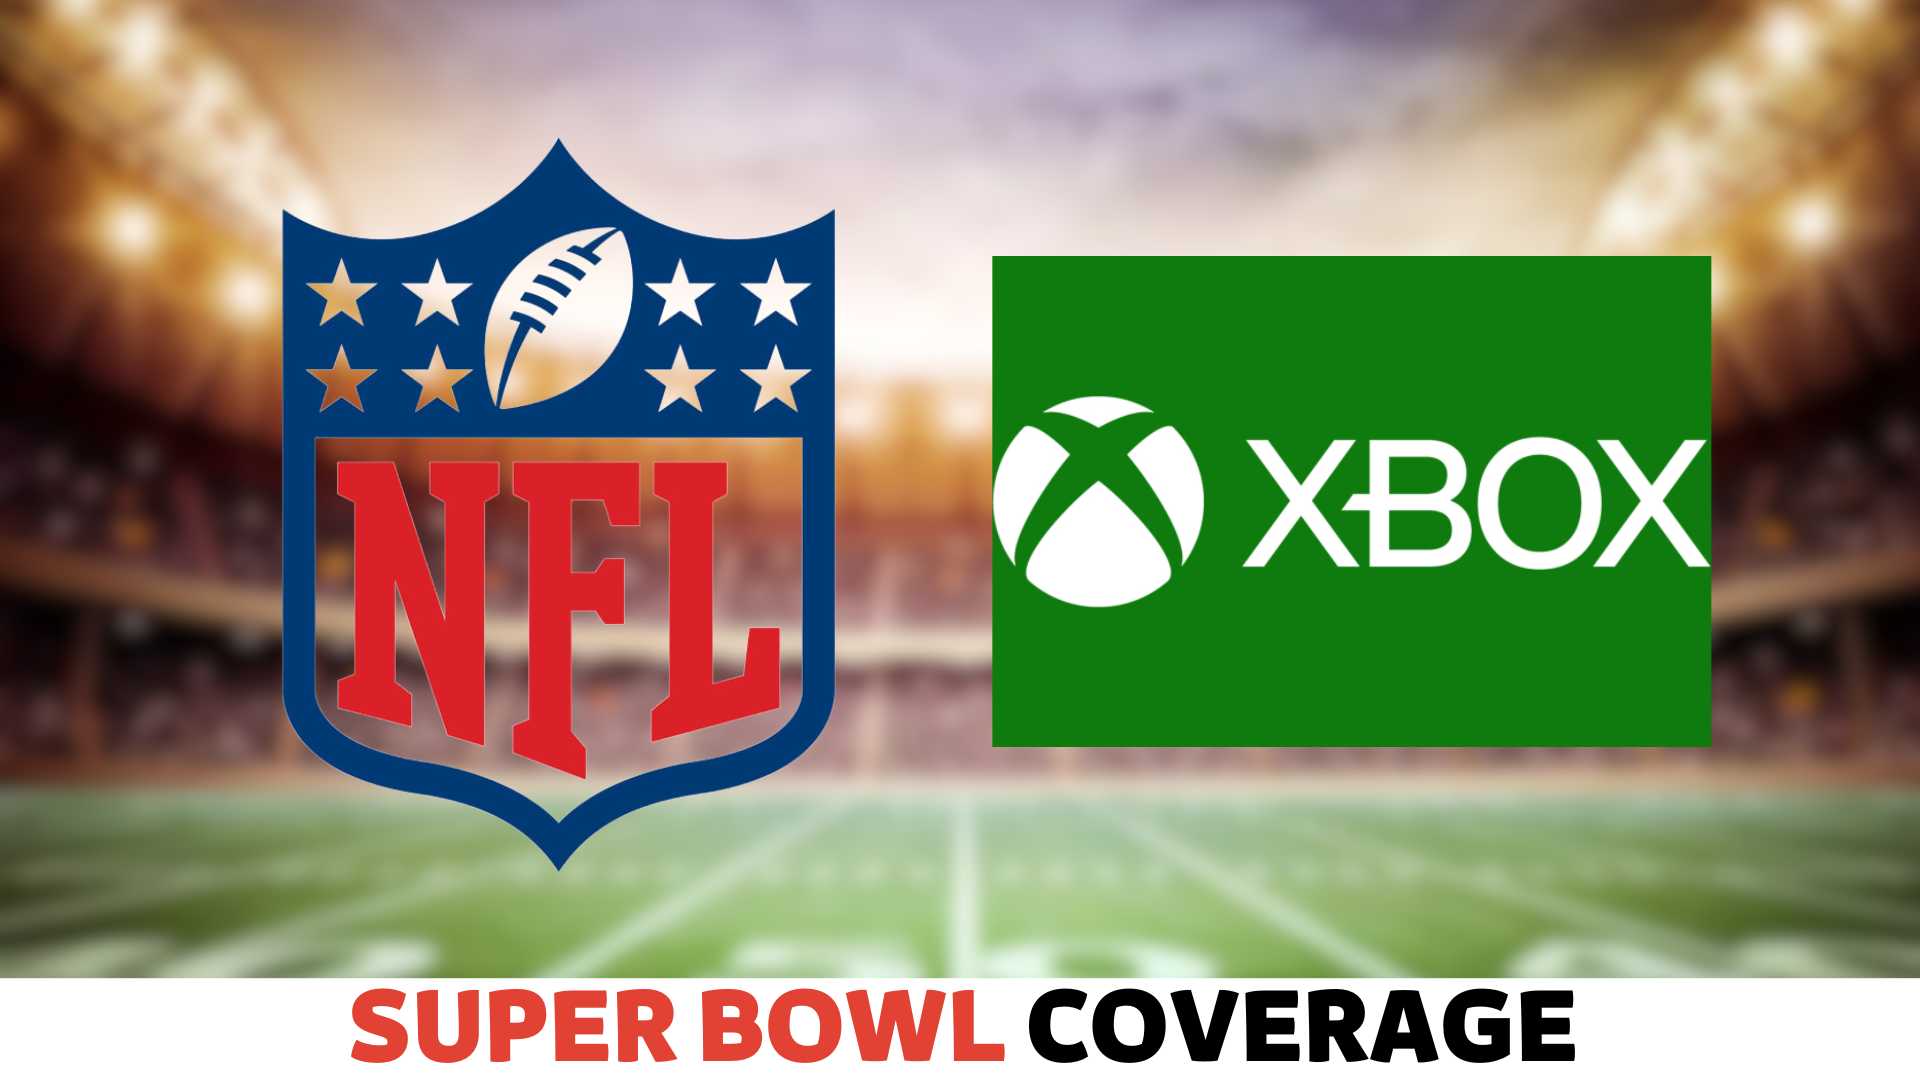 How to Watch NFL Games on Xbox